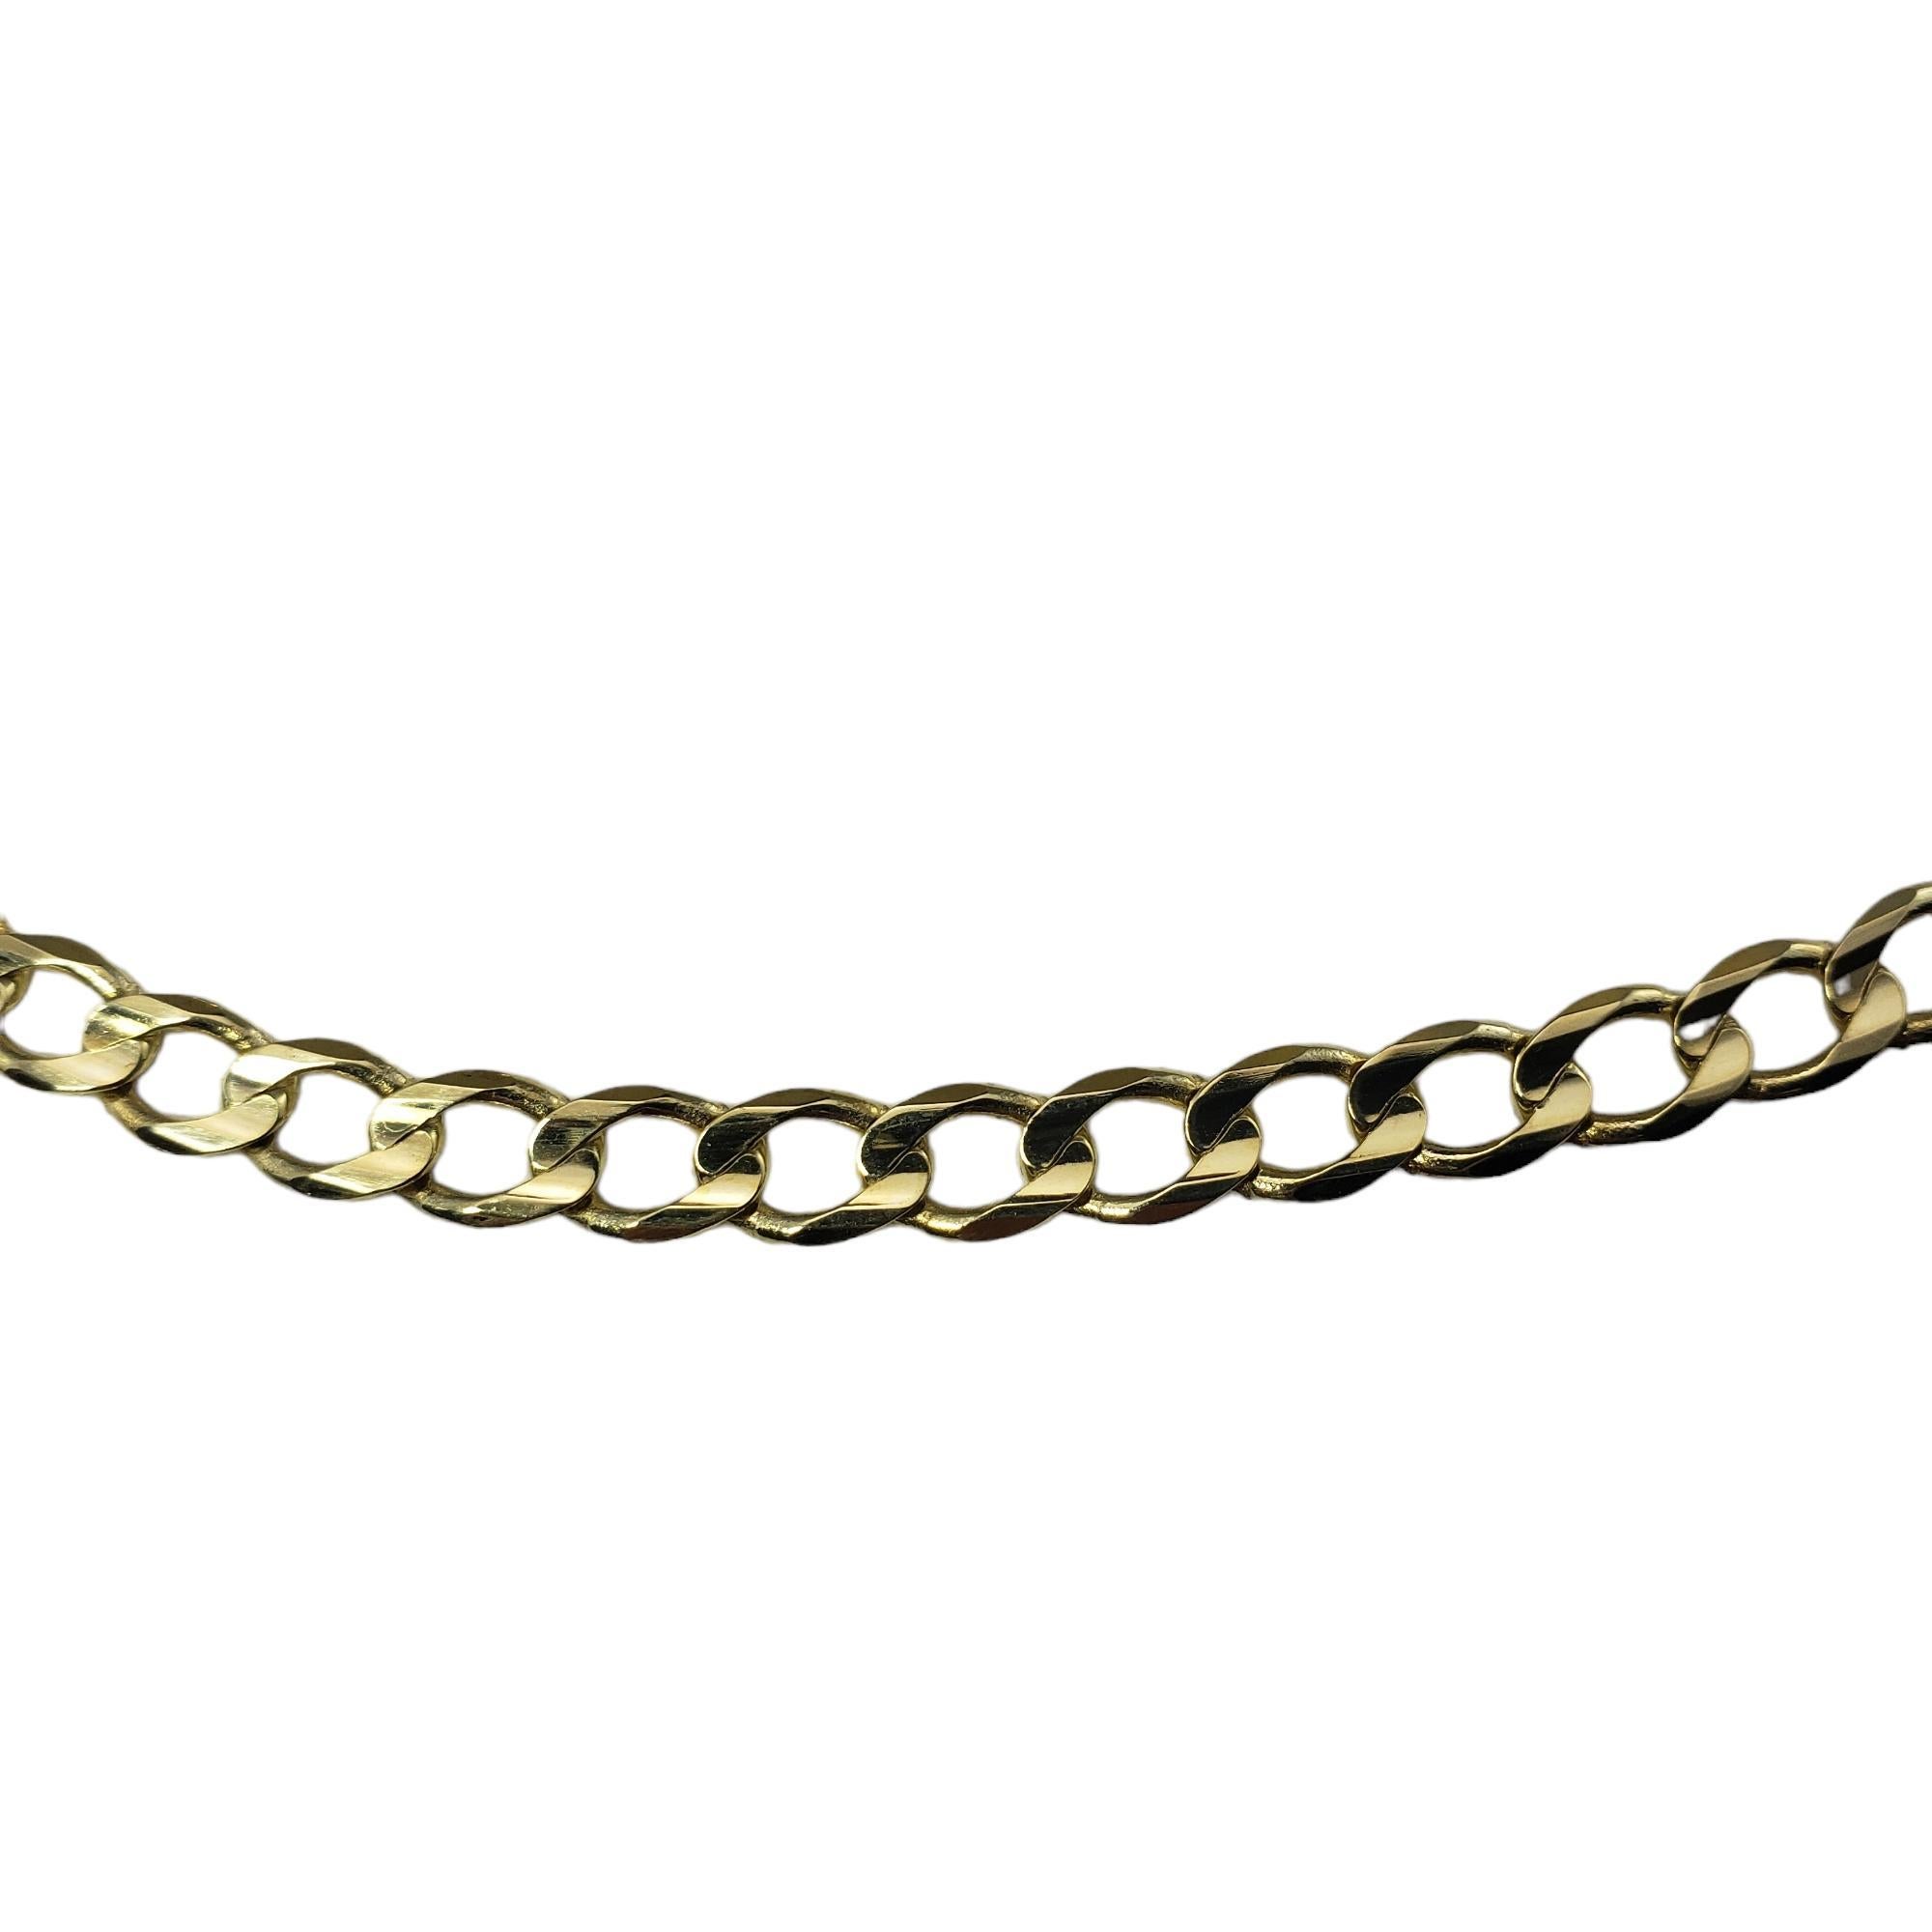 Vintage 10 Karat Yellow Gold Curb Chain Necklace-

This elegant curb chain necklace is crafted in beautifully detailed 10K yellow gold.  Width: 5 mm.

Size: 20 inches

Weight:  13.8 gr./  8.8 dwt.

Stamped: MIDAS 10K  TURKEY

Very good condition,